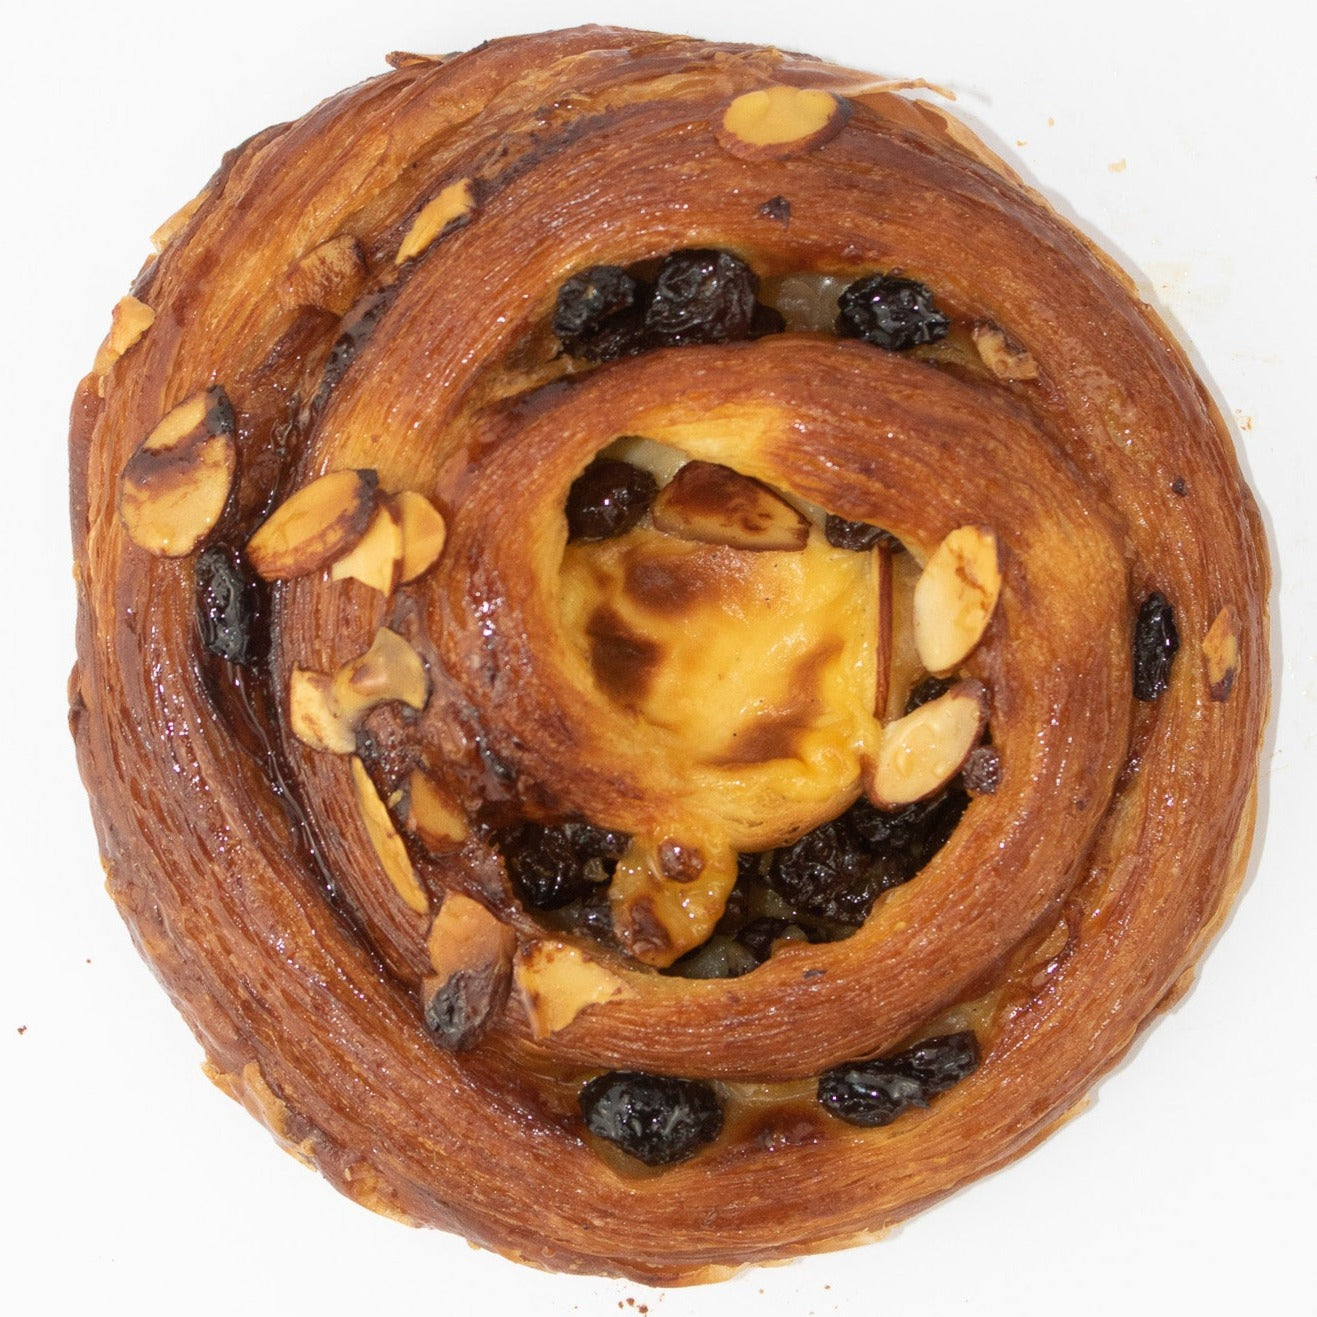 Image of a circular pastry. The pastry has raisins and custard throughout and is golden brown